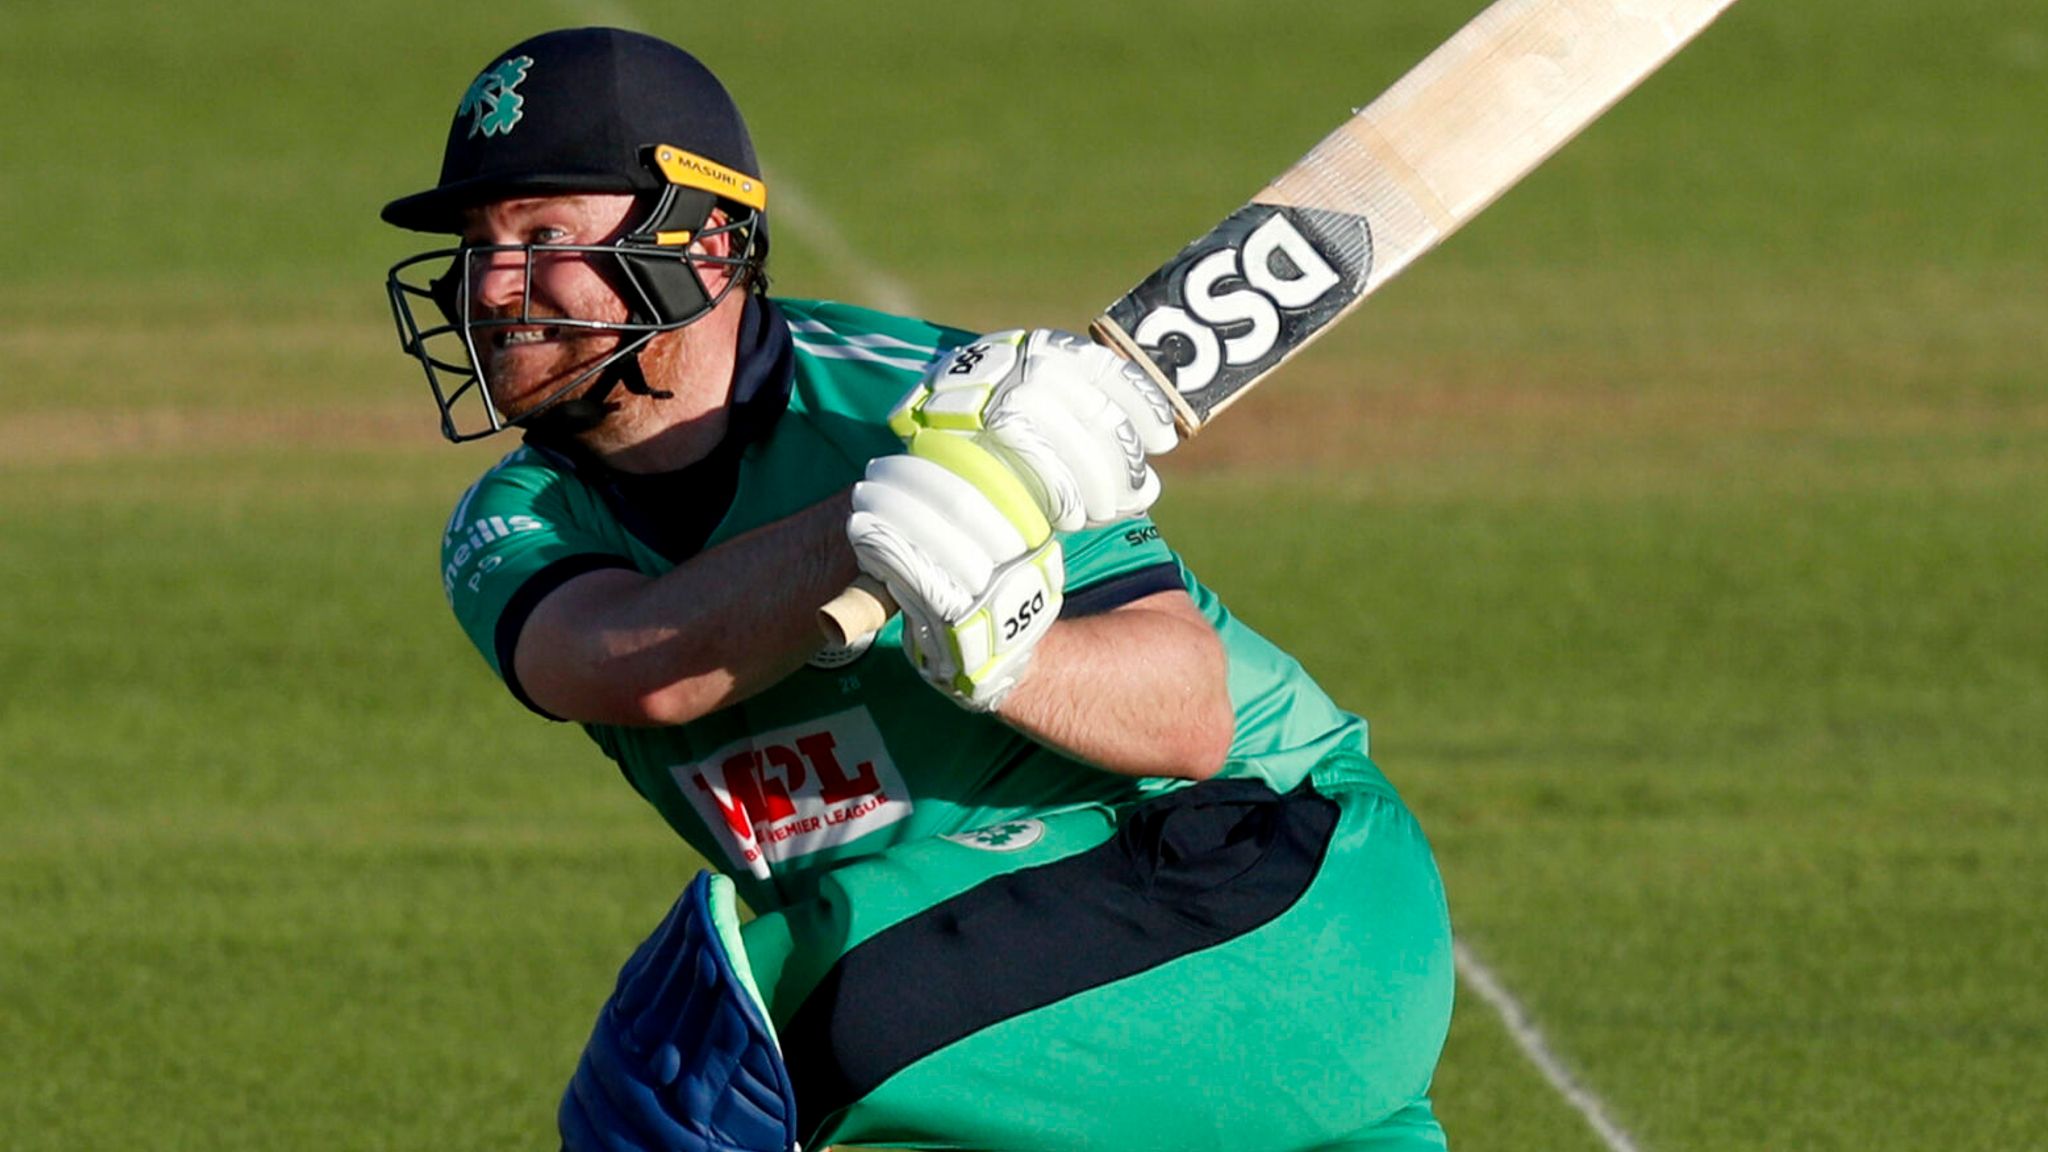 Paul Stirling&#39;s 11th ODI hundred in vain for Ireland as Afghanistan take unassailable 2-0 lead in series | Cricket News | Sky Sports